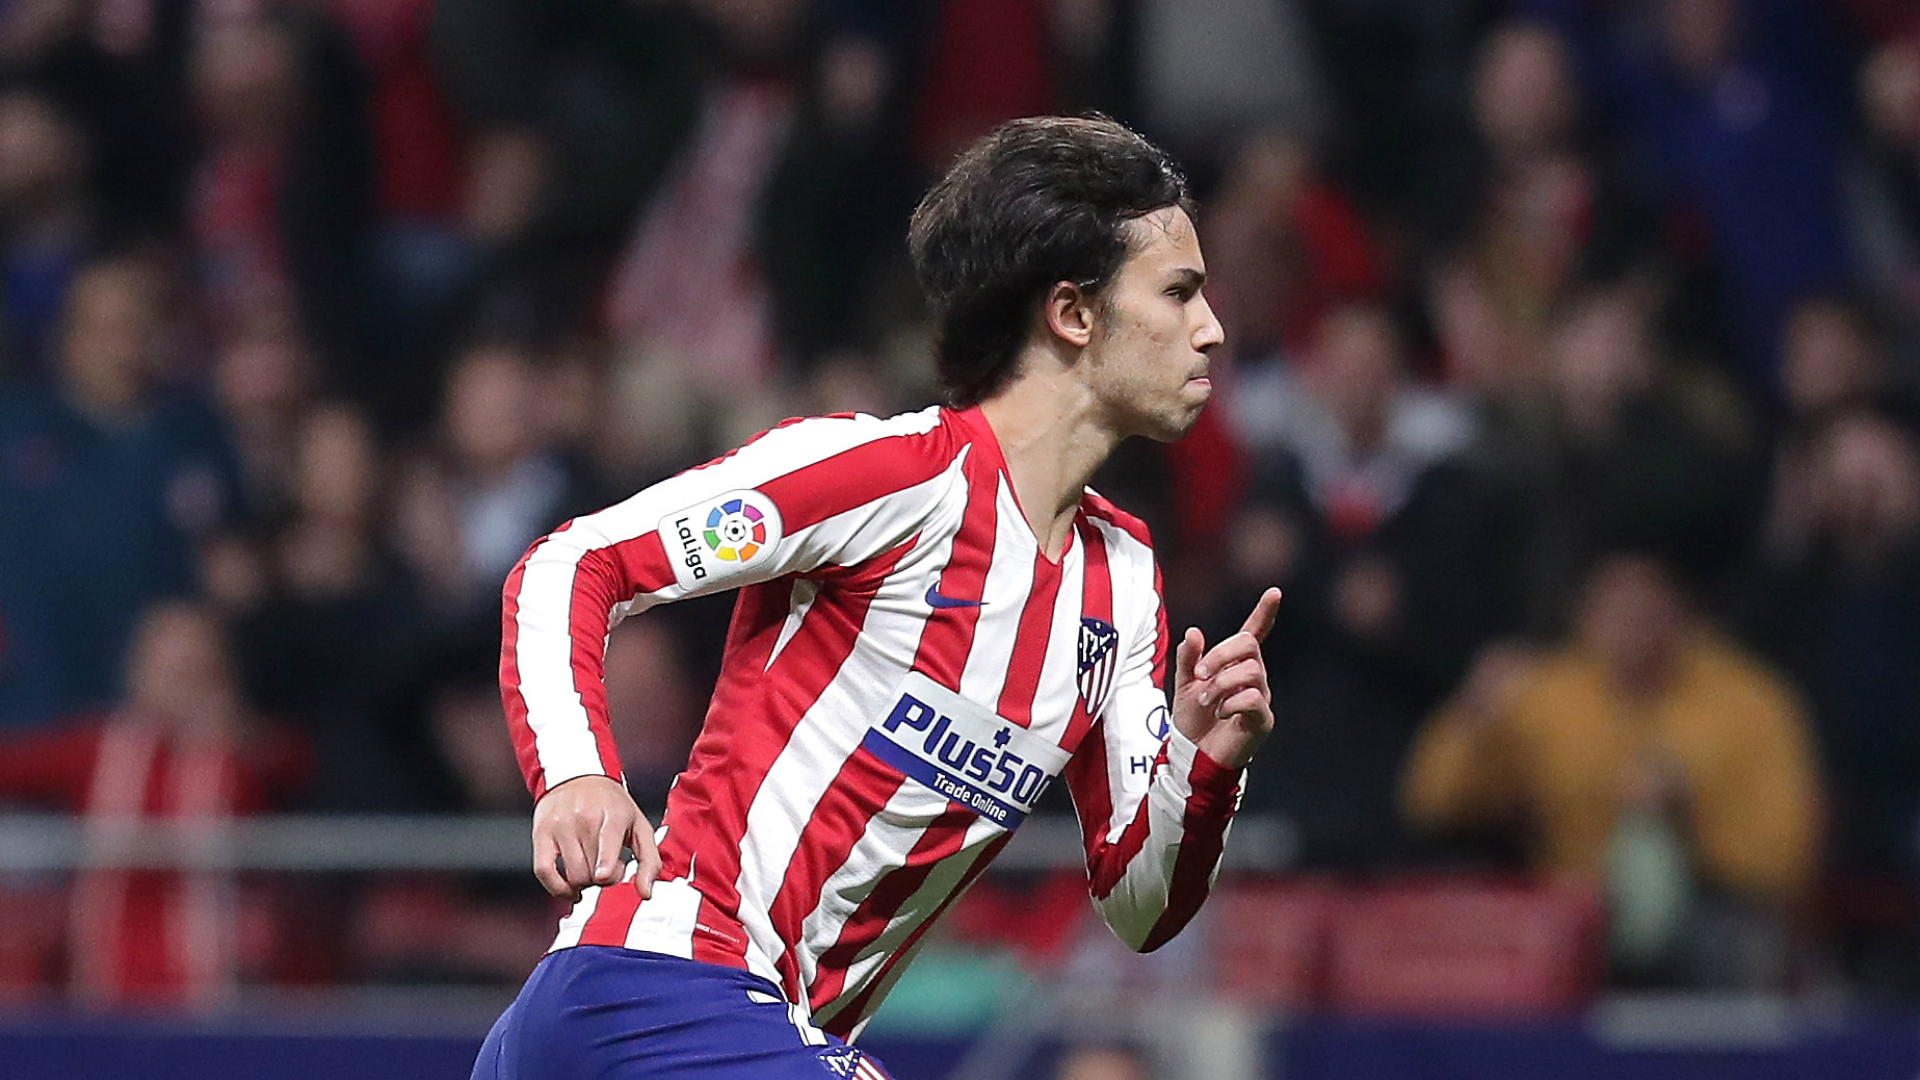 Atletico Madrid are predicted to finish in third position.